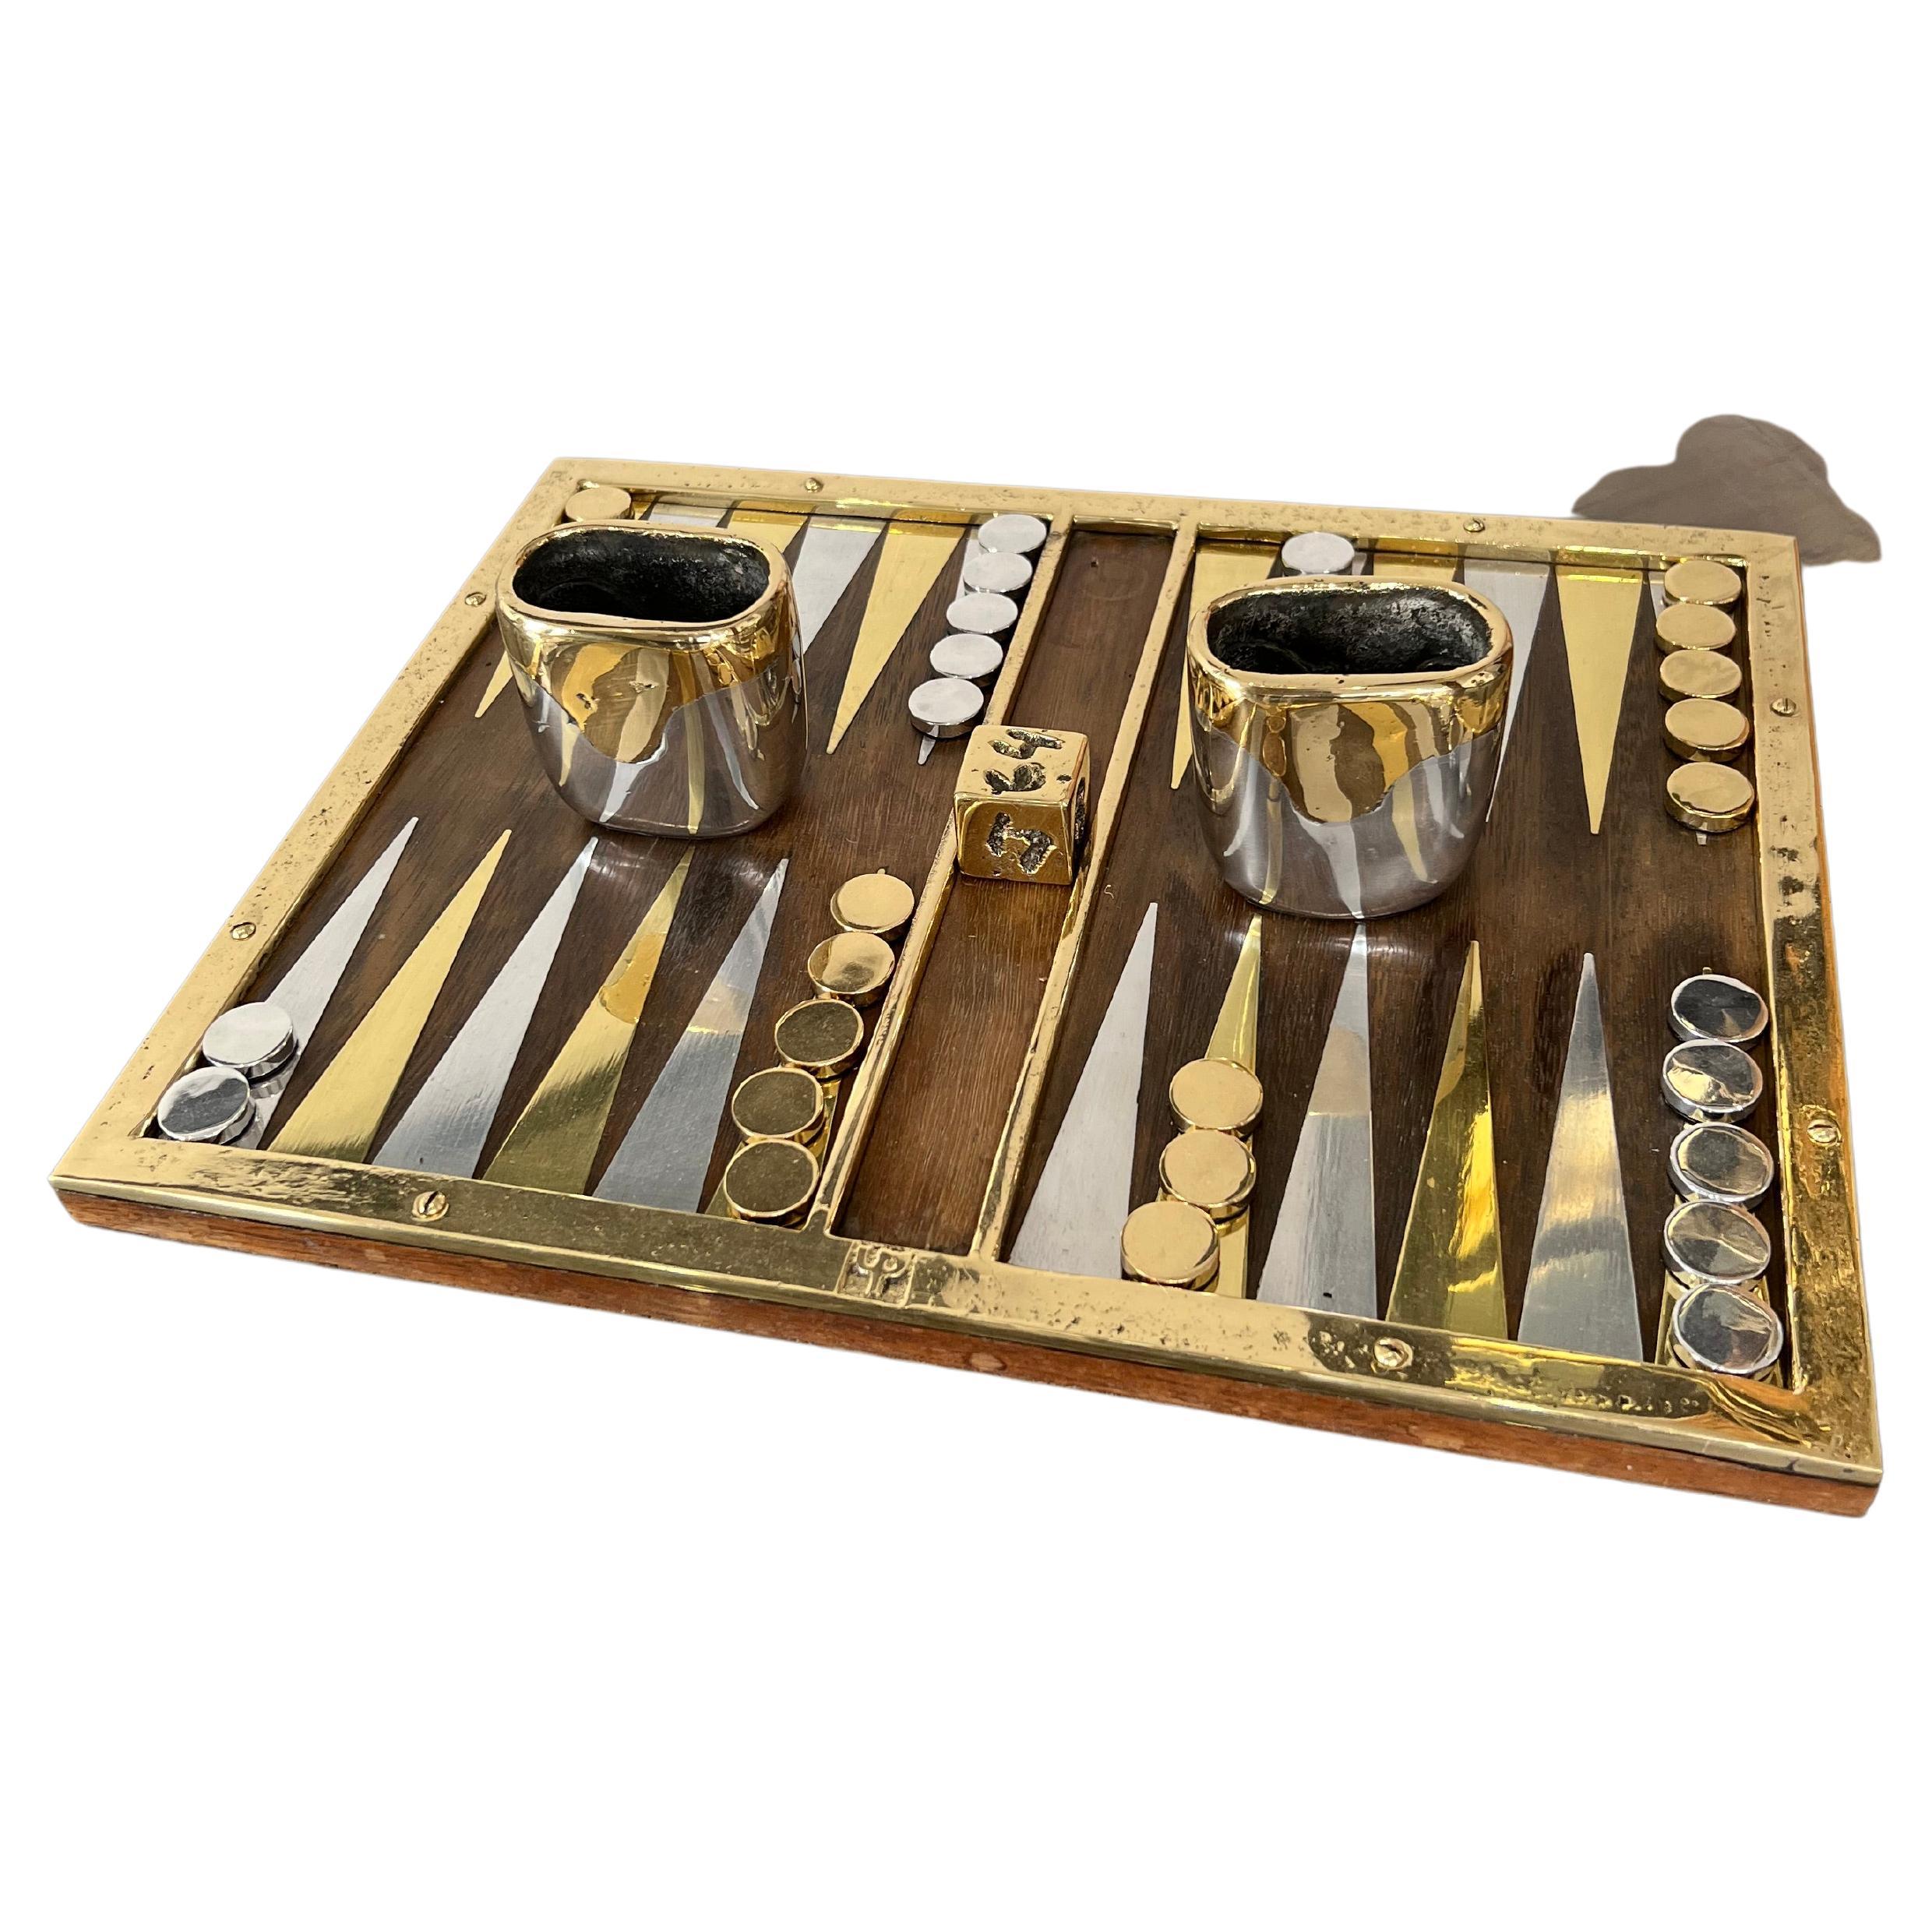 This backgammon was created by David Marshall in 1995 it is made of sandcast aluminum, sandcast brass and wood.
It is used but does not show any wearings.